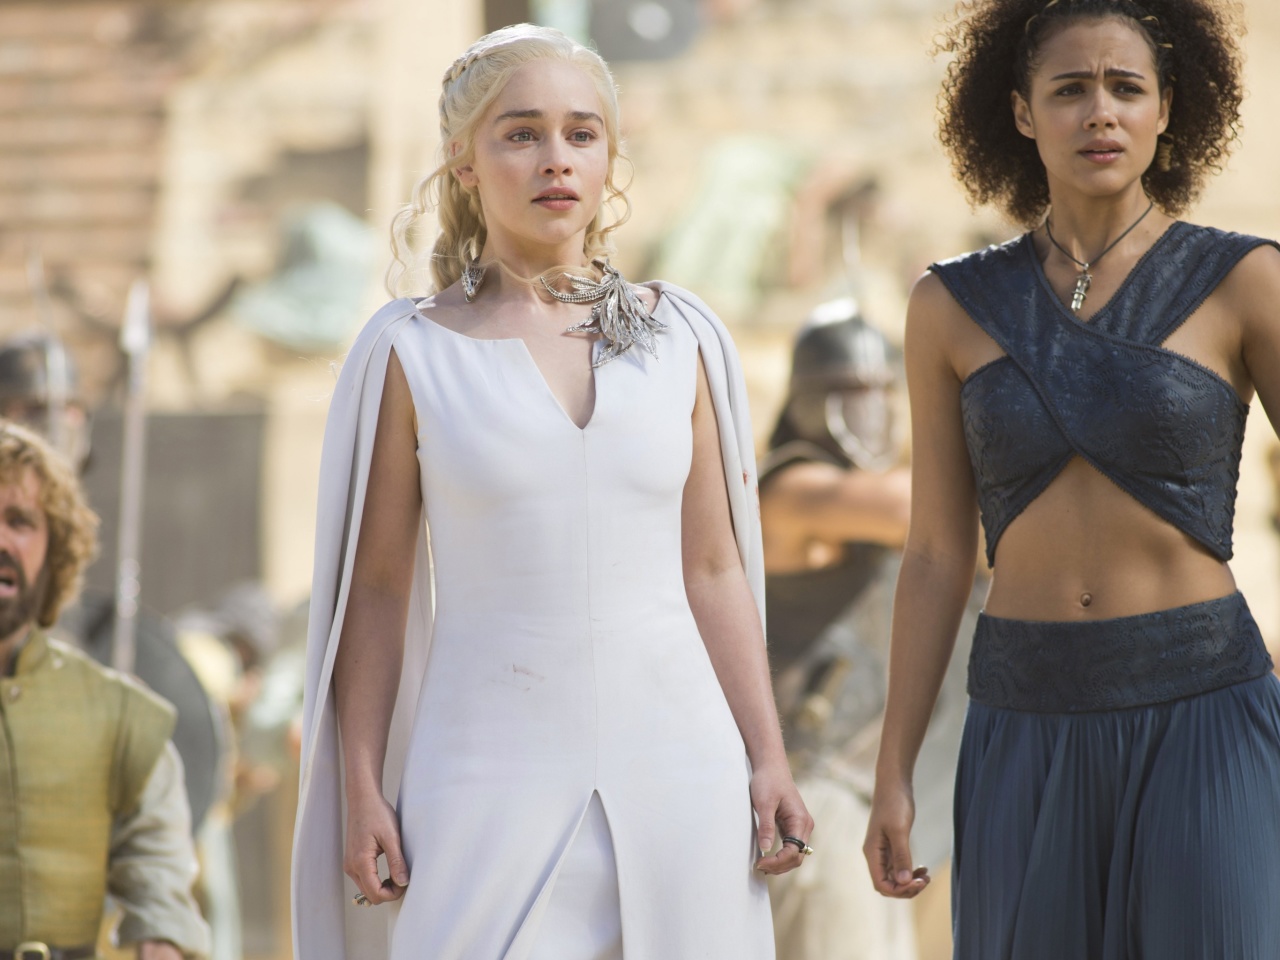 Game Of Thrones Emilia Clarke and Nathalie Emmanuel as Missandei wallpaper 1280x960